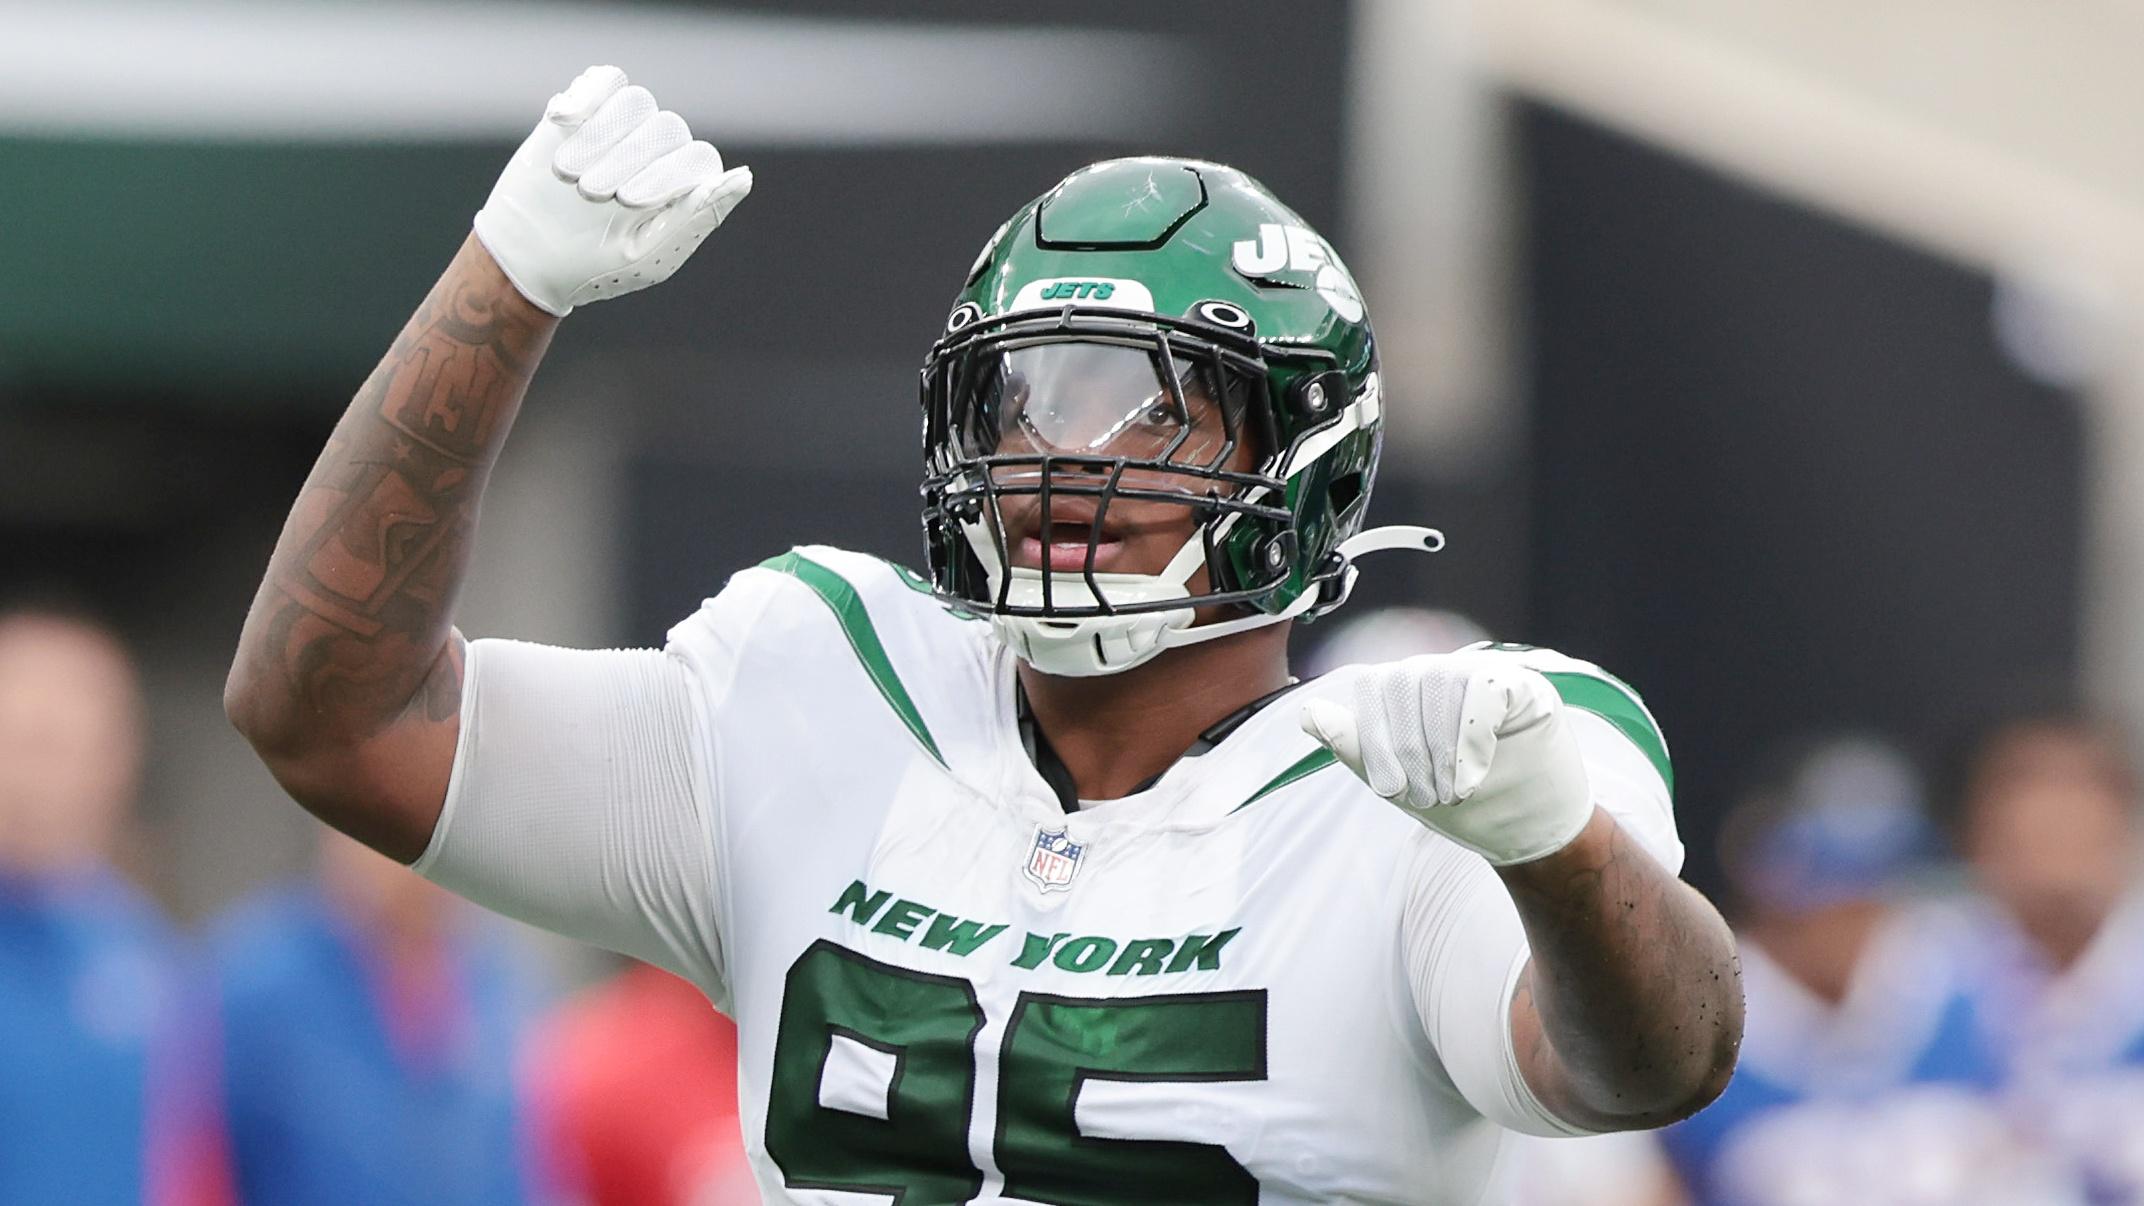 Nov 6, 2022; East Rutherford, New Jersey, USA; New York Jets defensive tackle Quinnen Williams (95) celebrates a defensive stop against the Buffalo Bills during the second half at MetLife Stadium. Mandatory Credit: Vincent Carchietta-USA TODAY Sports / © Vincent Carchietta-USA TODAY Sports